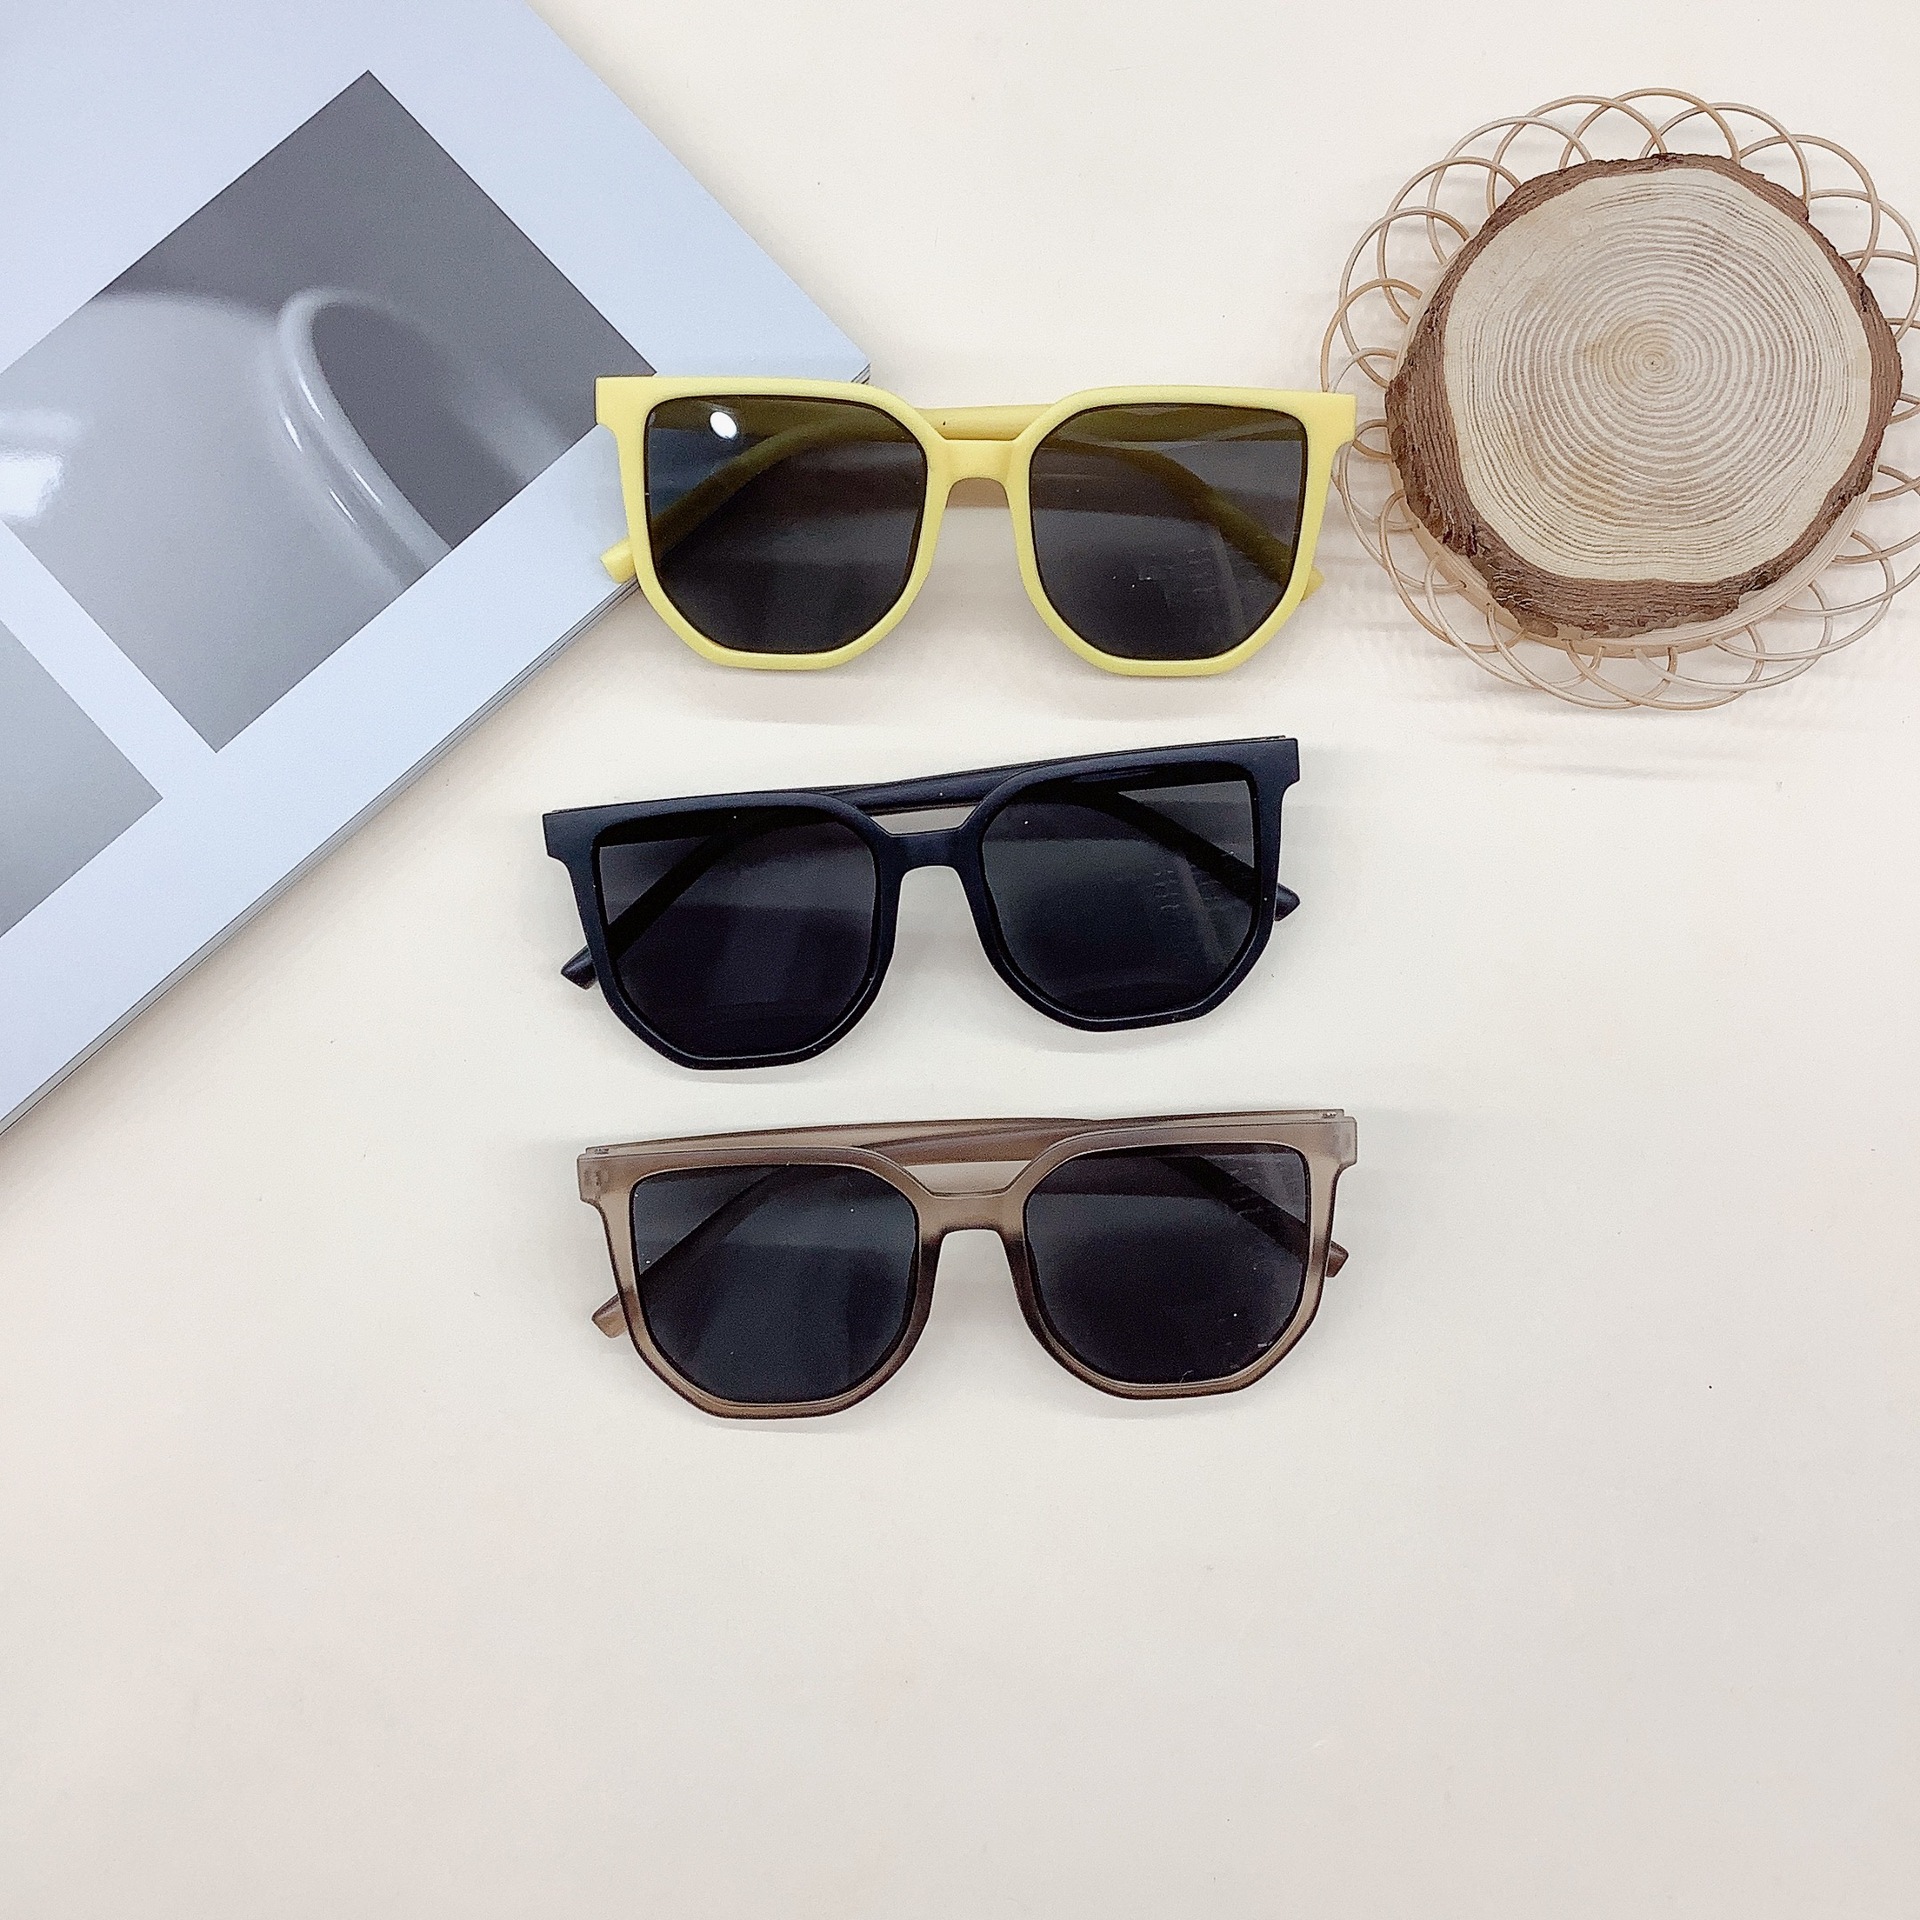 Children's Sunglasses Frosted Cross-Border Retro Fashion Trends Pc Frame Boys and Girls Travel UV Protection Sunglasses